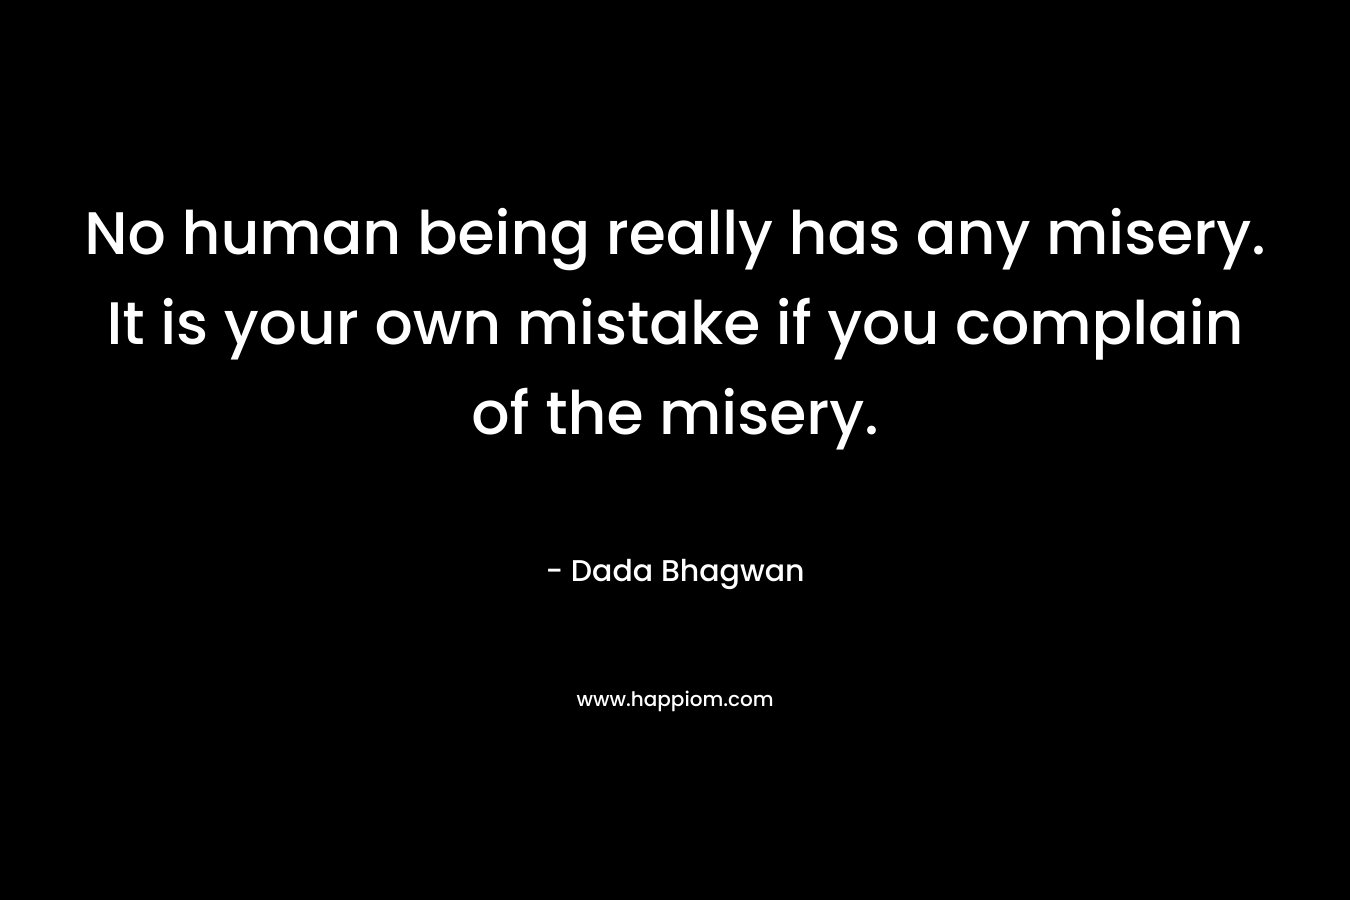 No human being really has any misery. It is your own mistake if you complain of the misery.